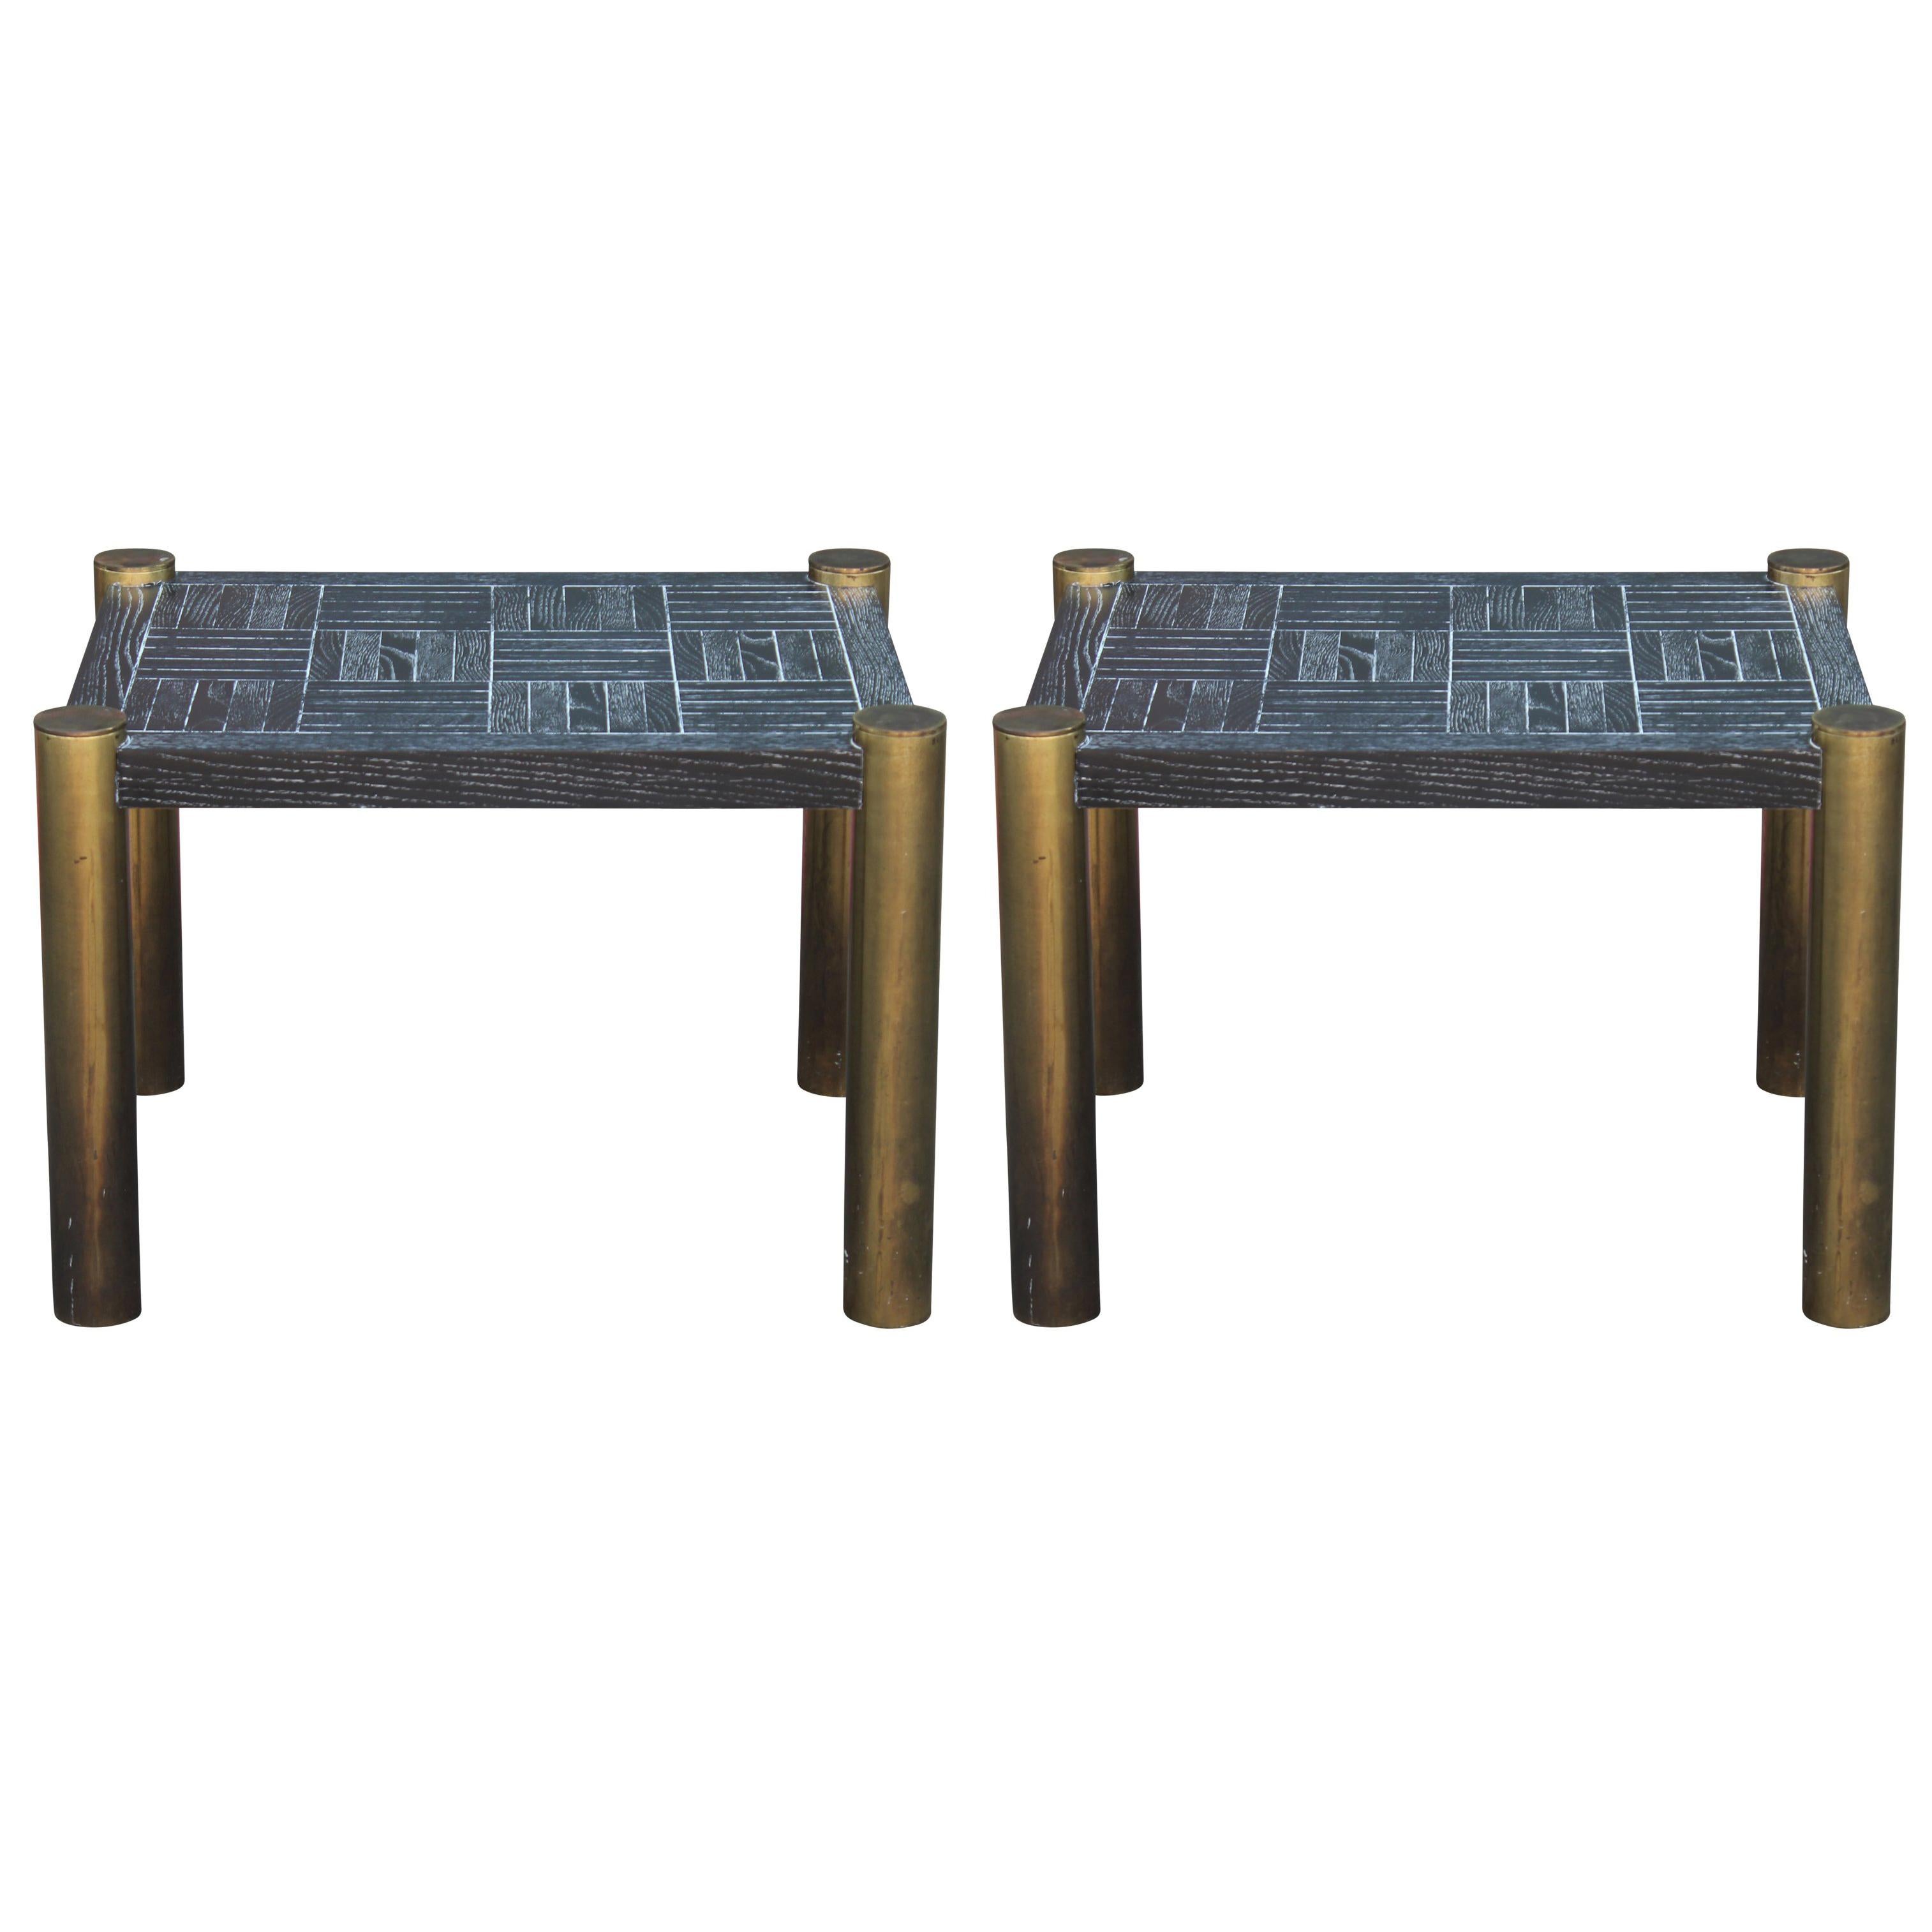 Pair of Modern Brass Side Tables with a Cerused Black Top by Lane Furniture